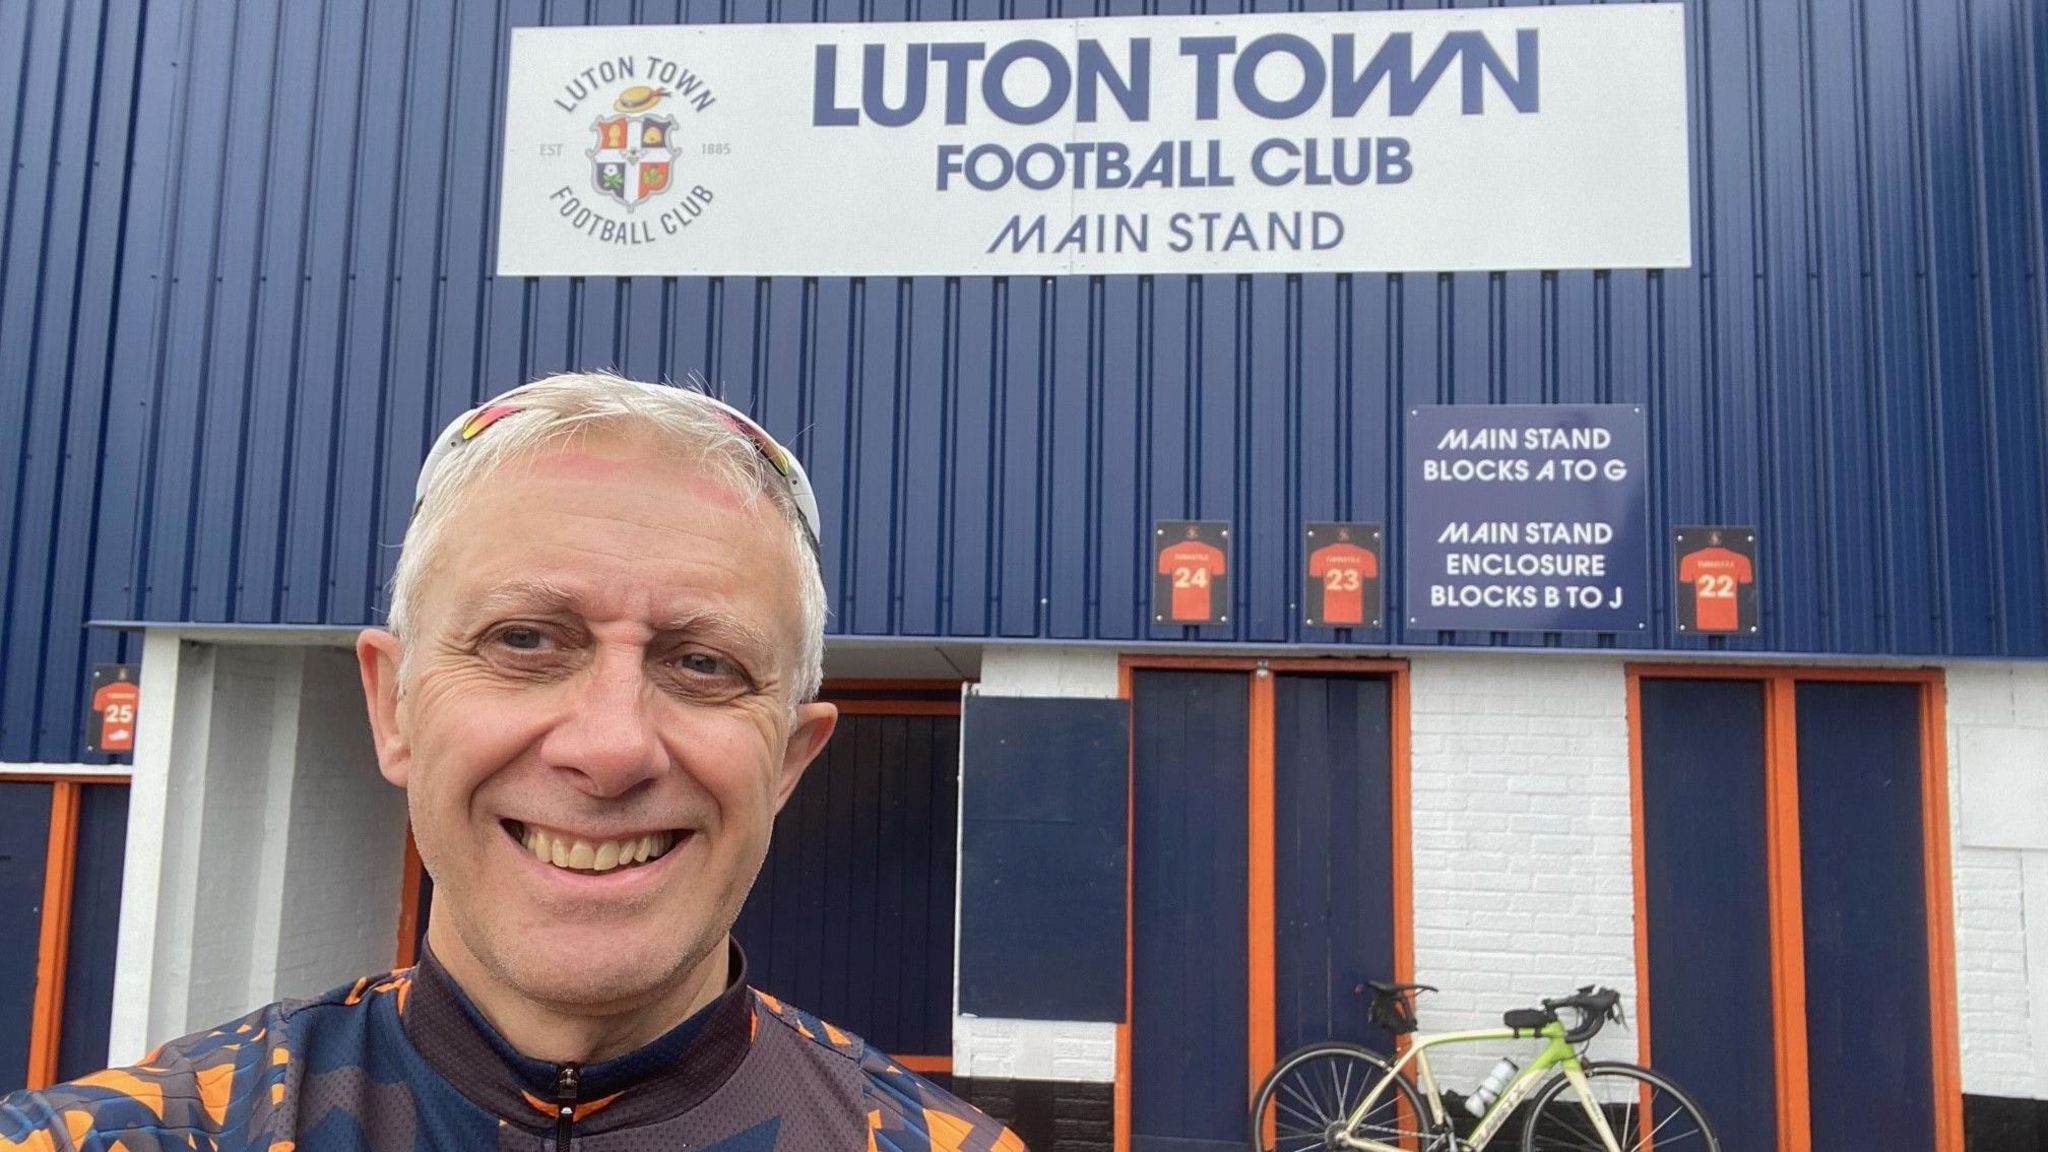 Mark Crowther at Luton Town Football Club